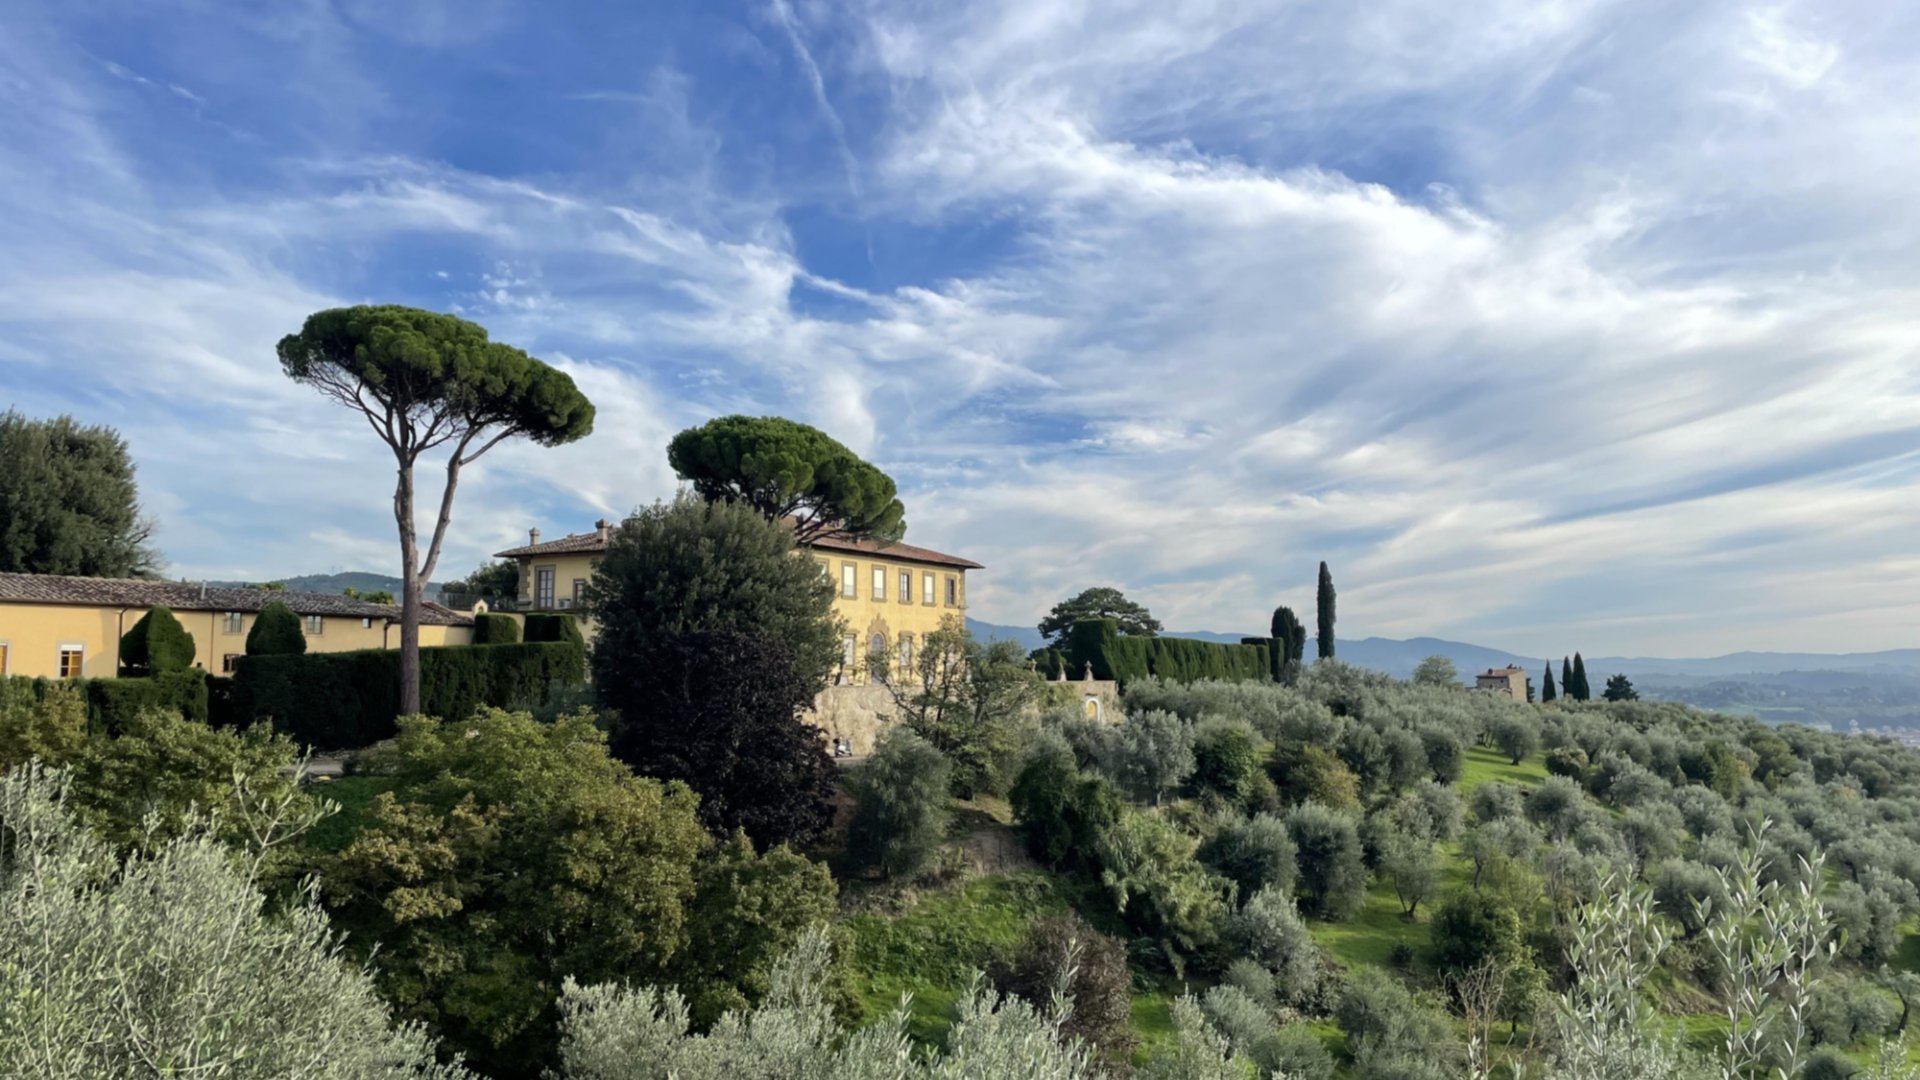 From Florence to Arezzo along the Setteponti